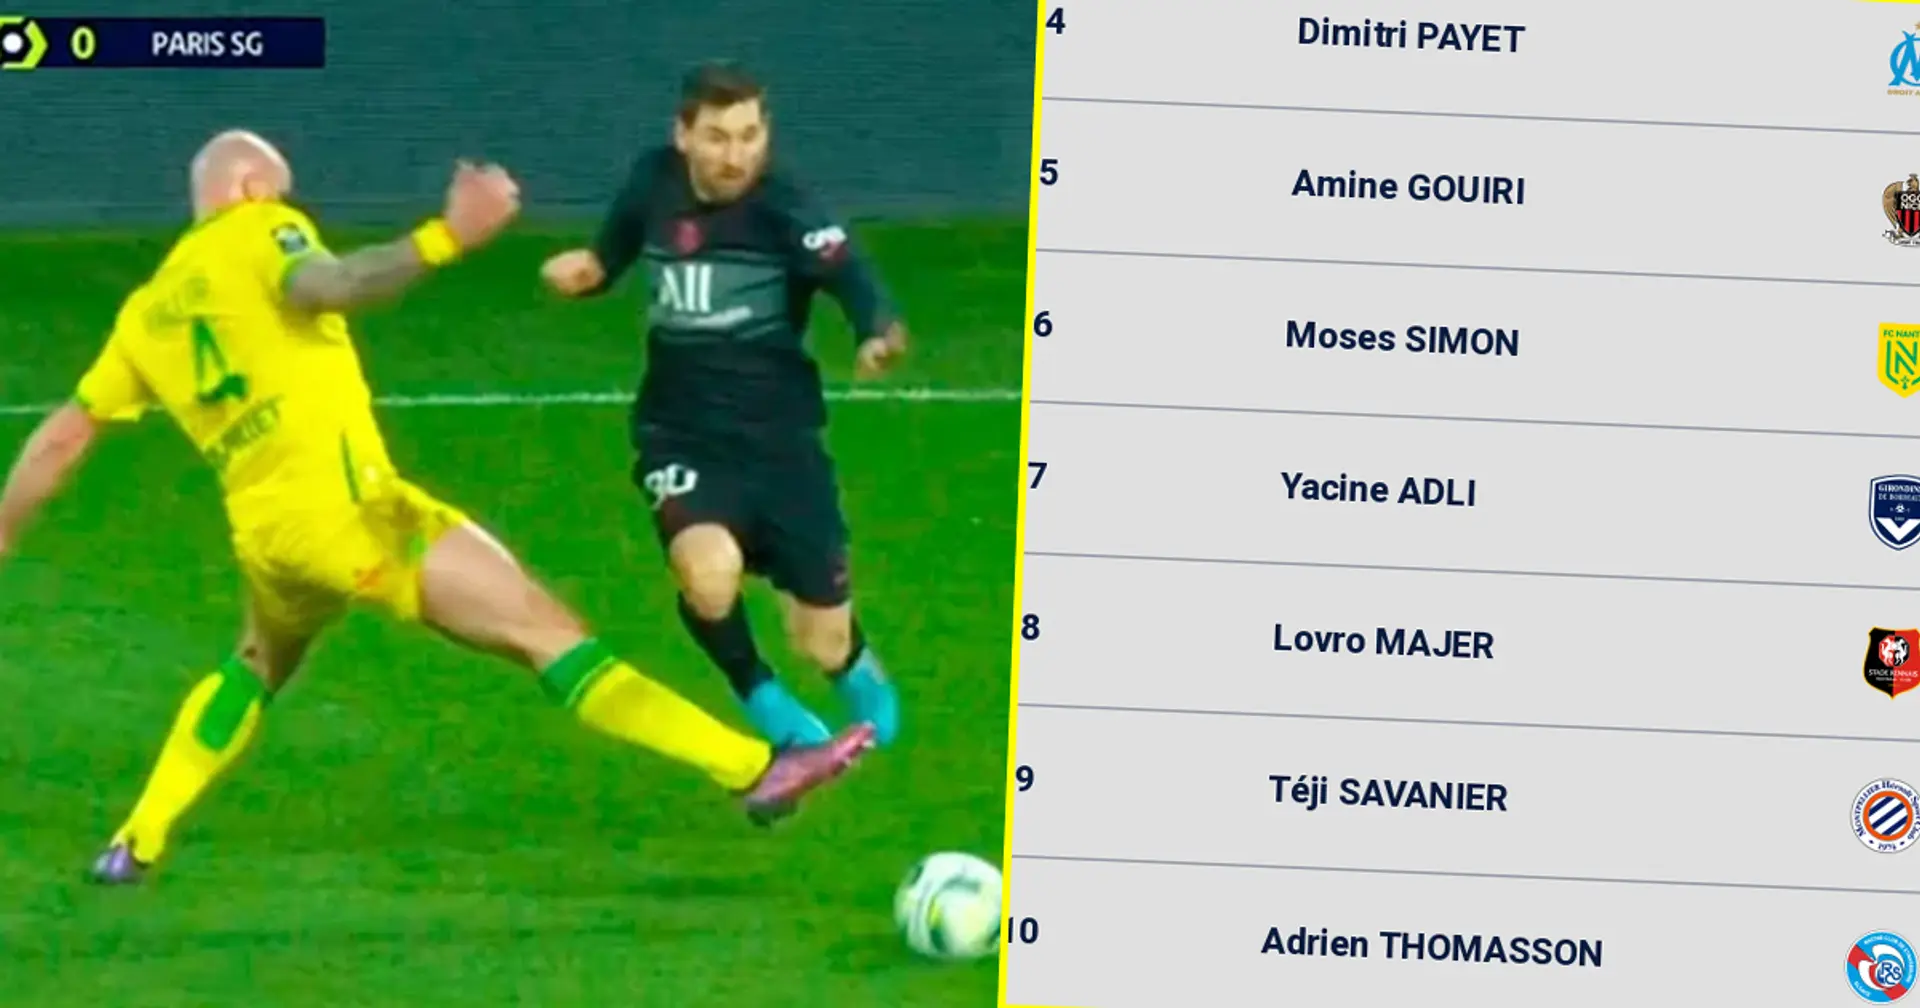 Where Messi stands among players with most Ligue 1 assists this season